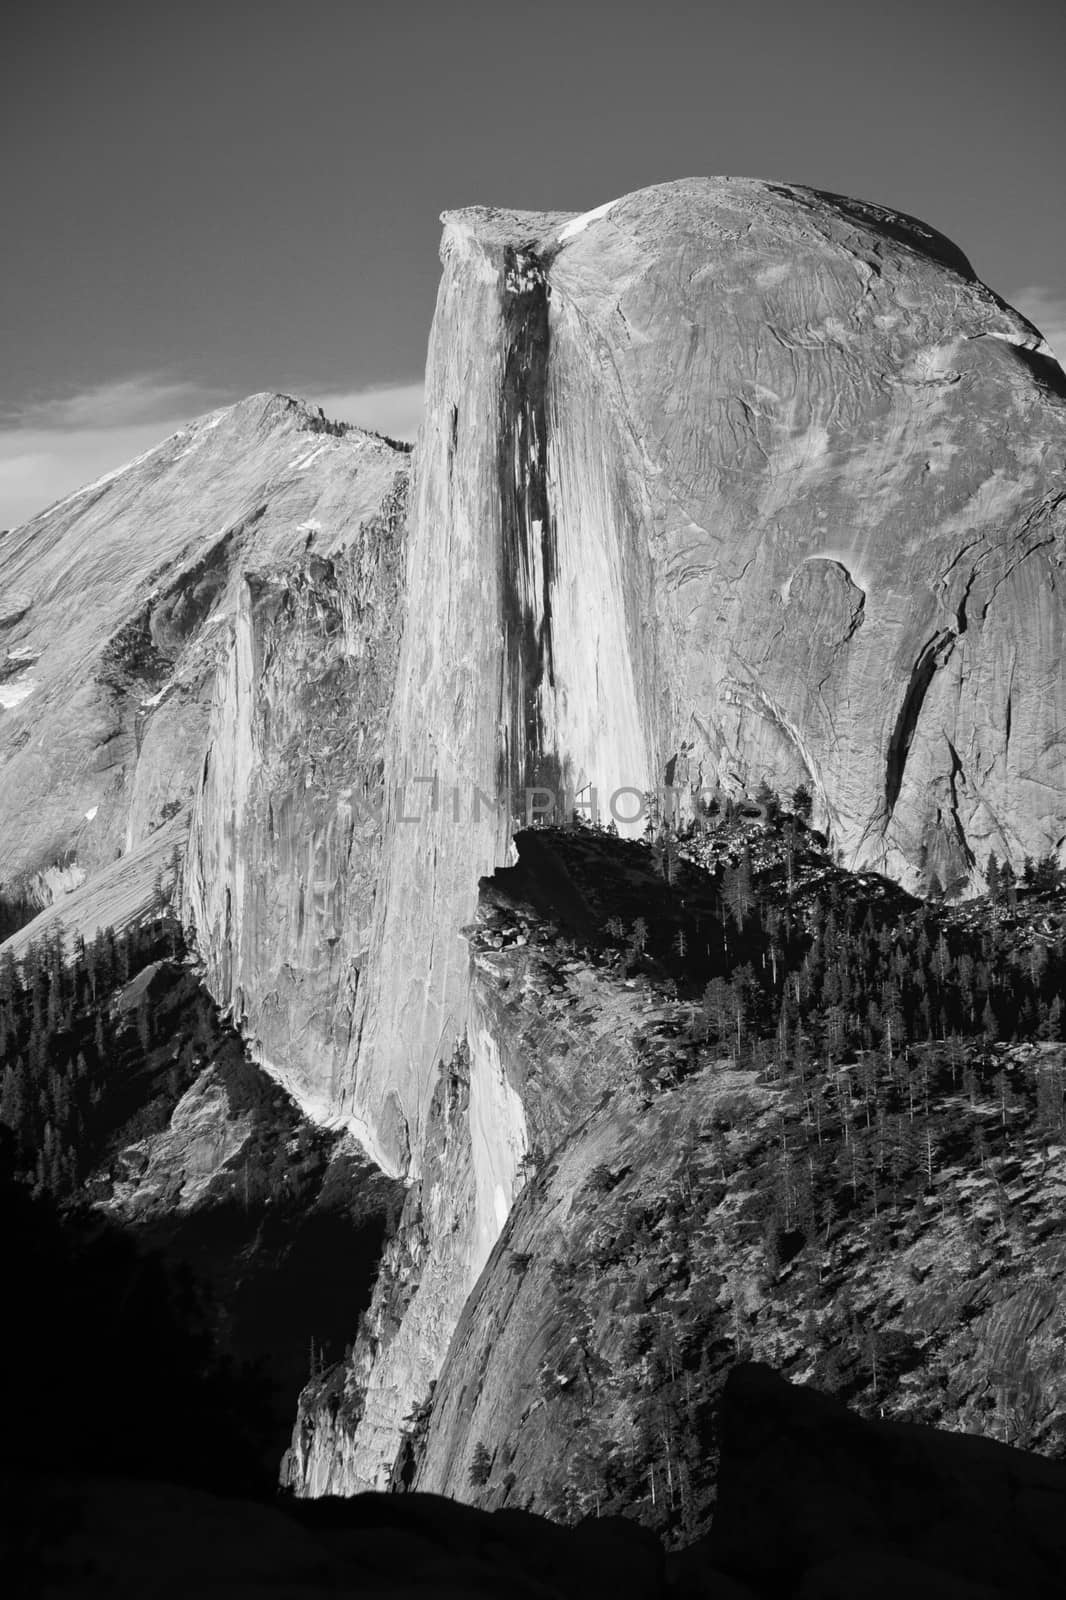 Rock formations in a valley from Glacier Point, Yosemite Valley, Yosemite National Park, California, USA